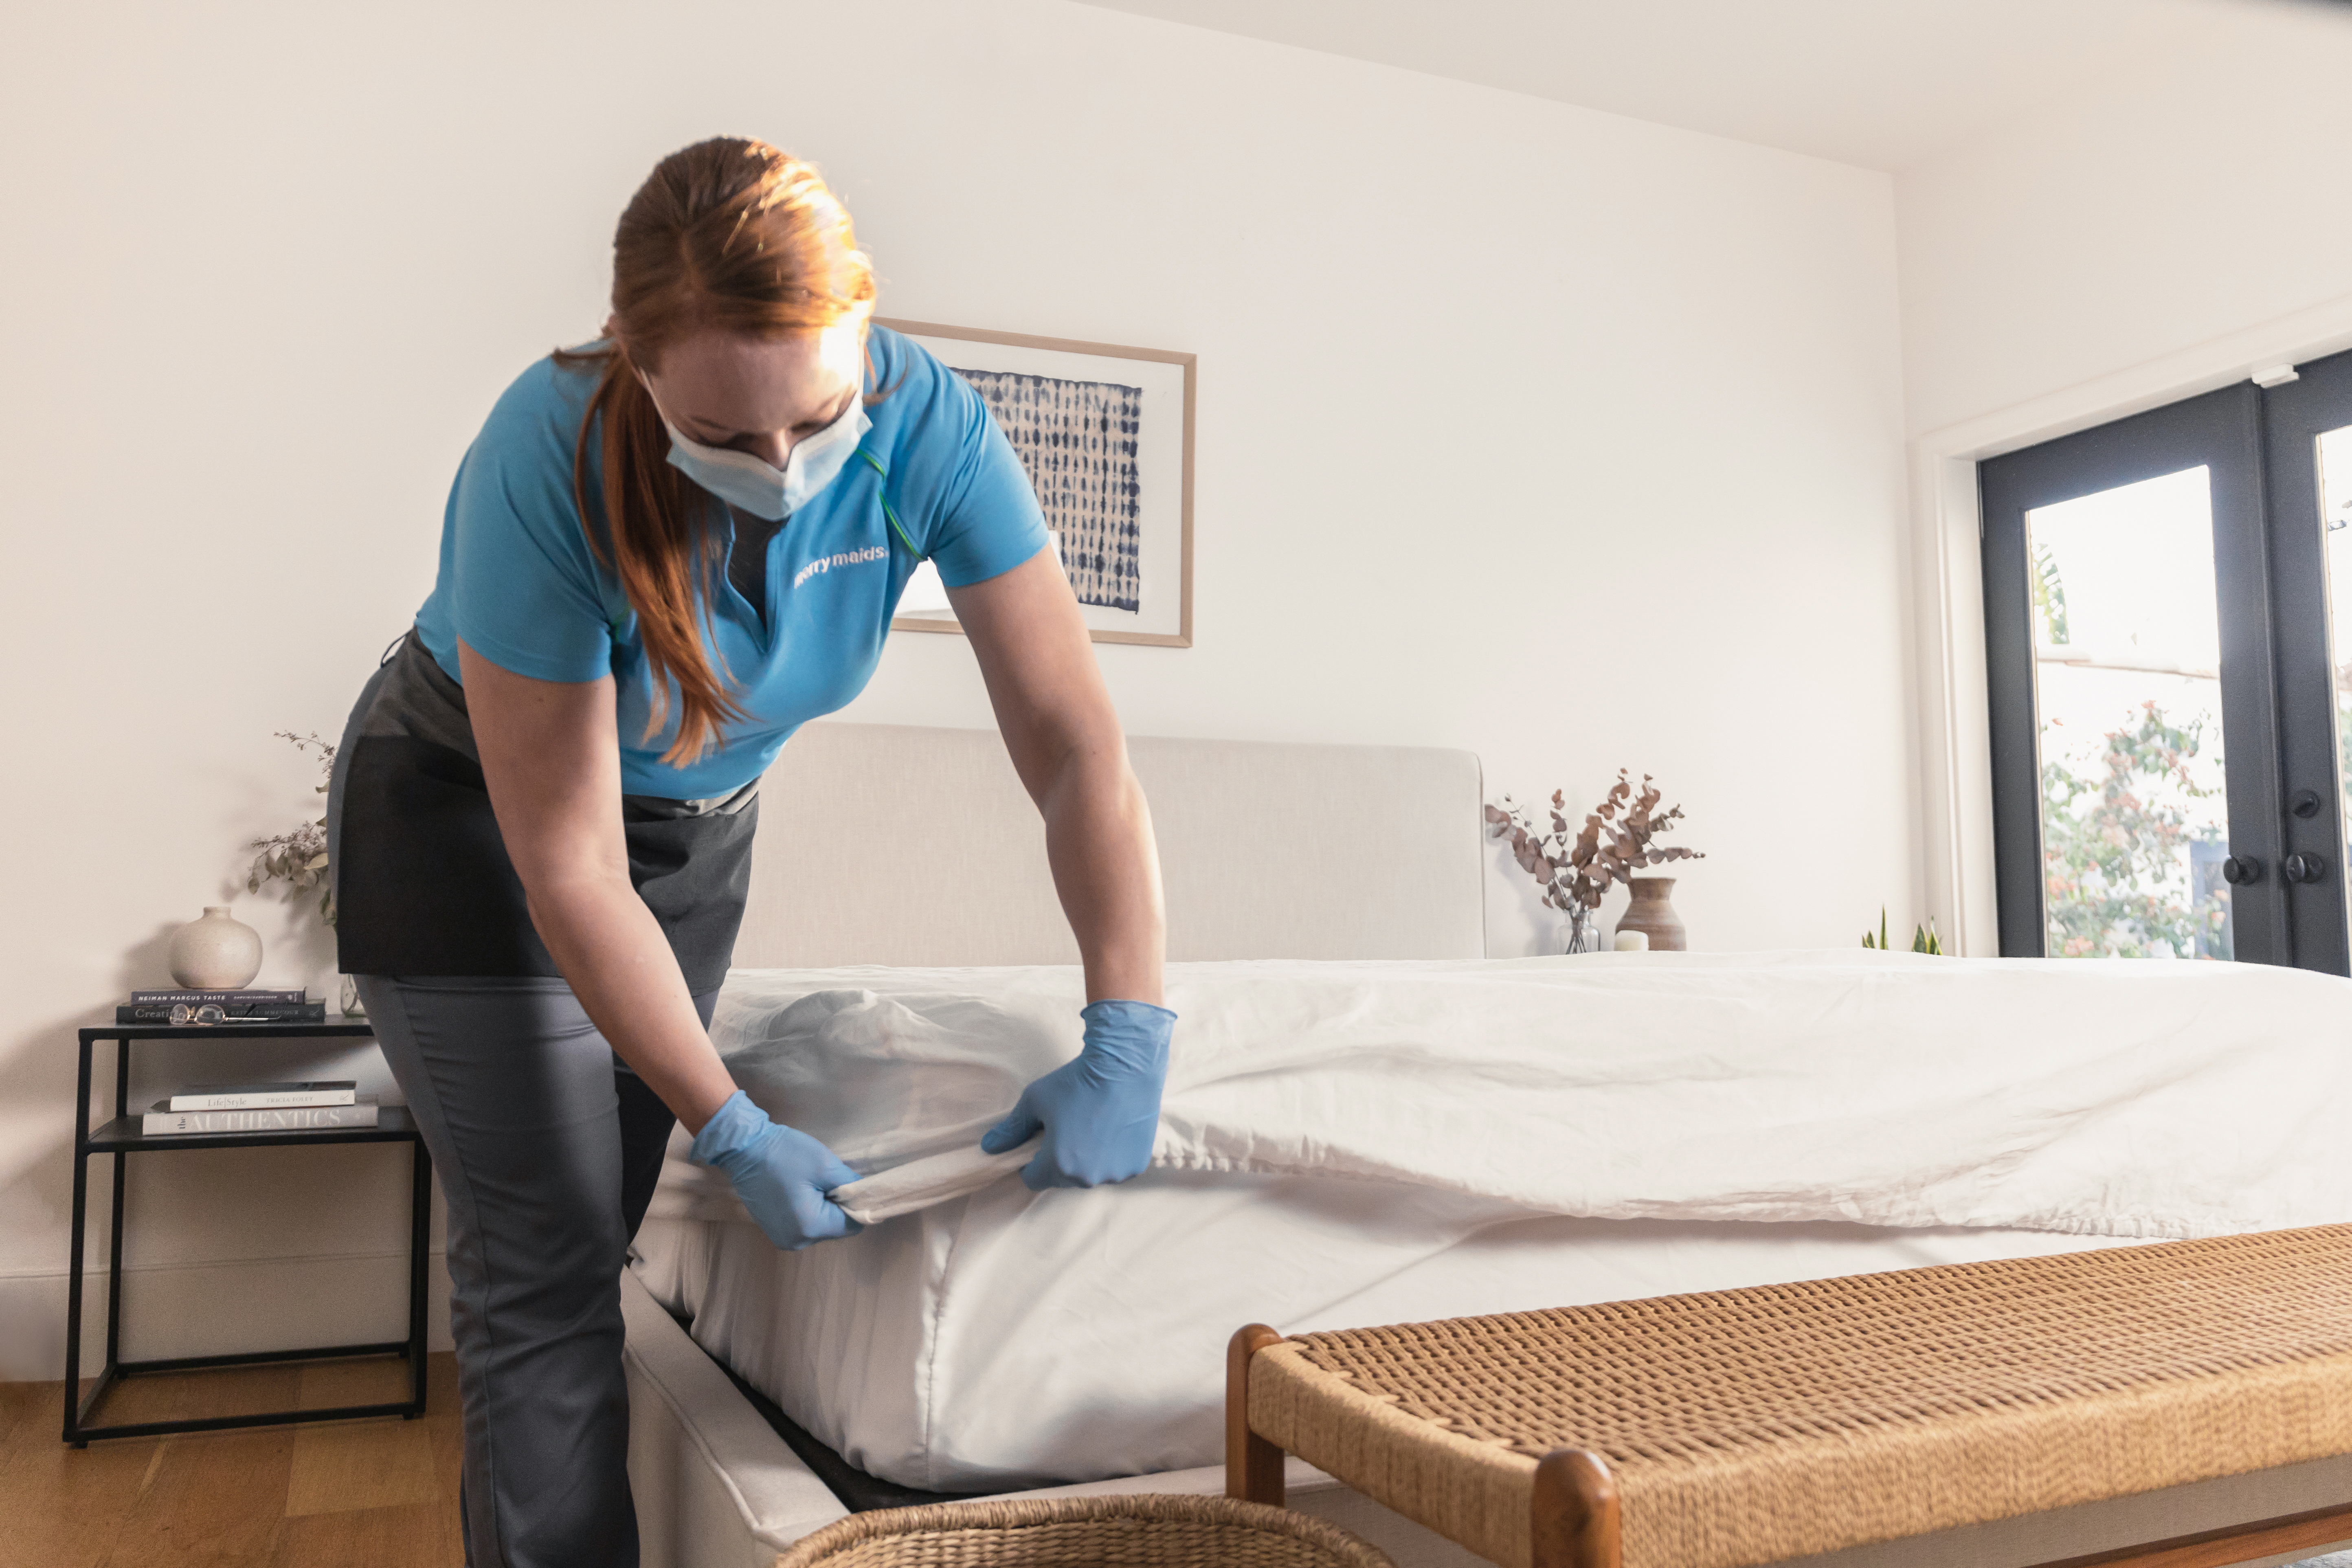 A Merry Maids house cleaner does maid services in Tampa